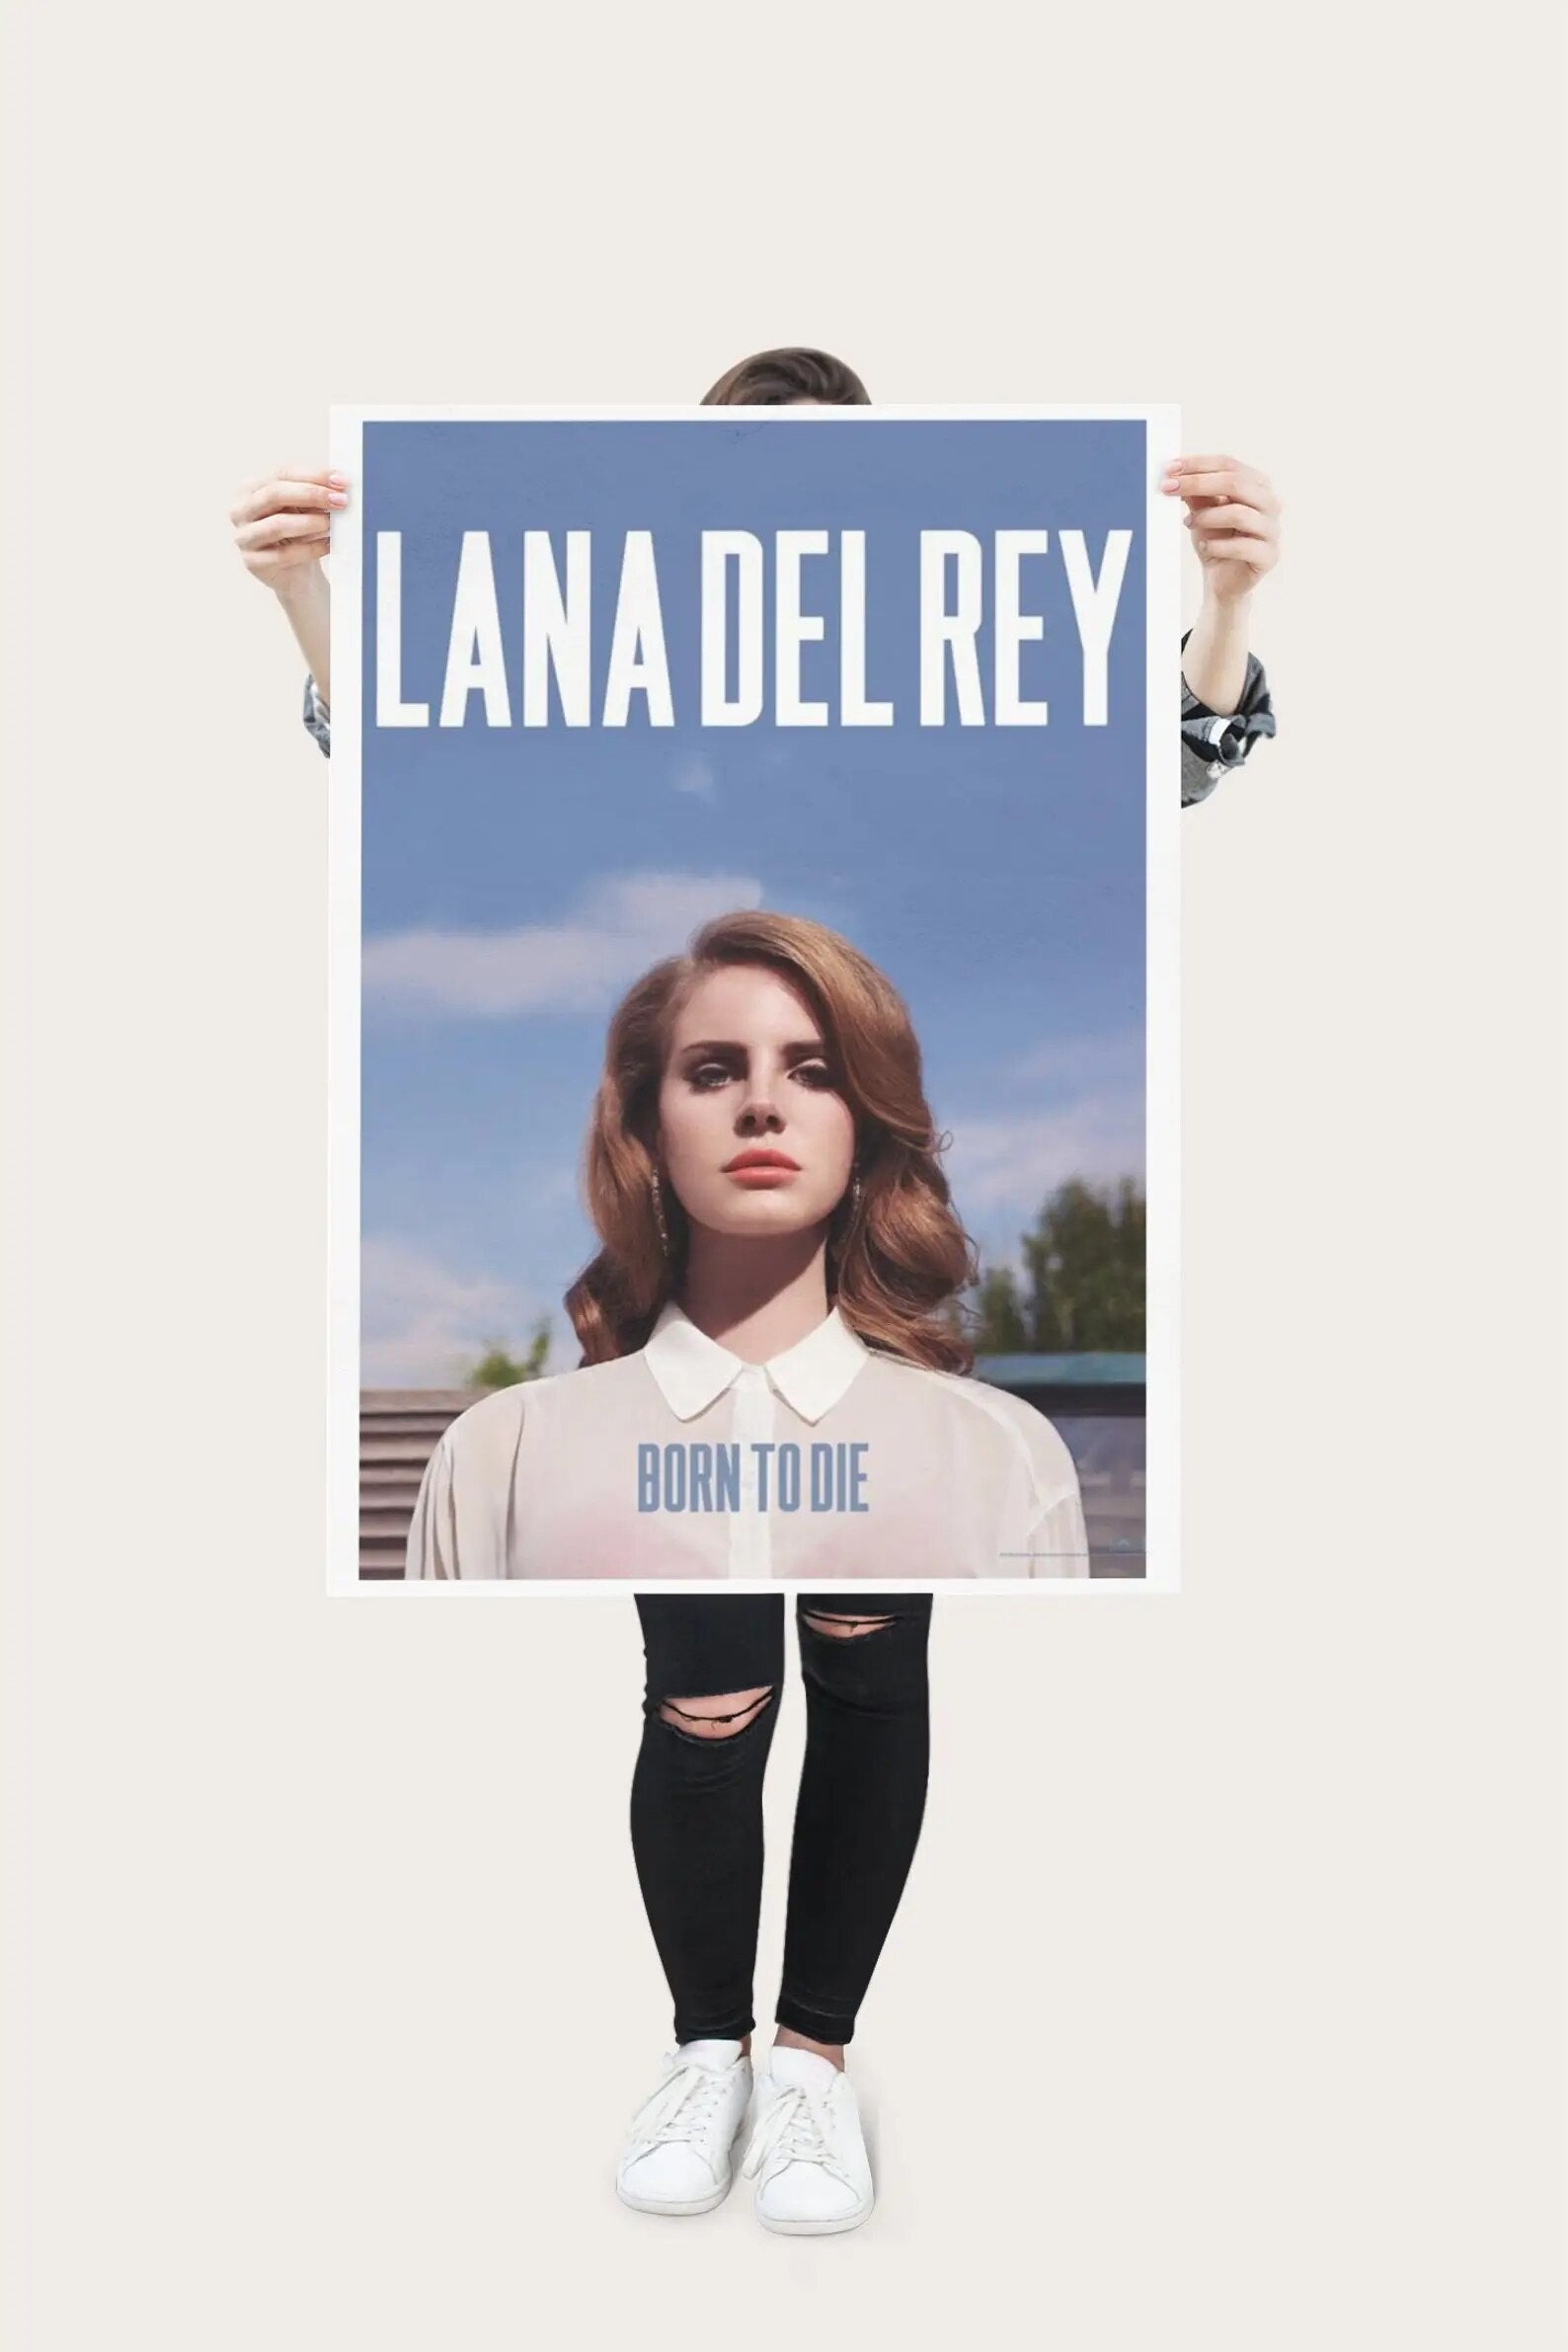 A woman holding a poster of Lana Del Rey's Born to Die album cover - Lana Del Rey